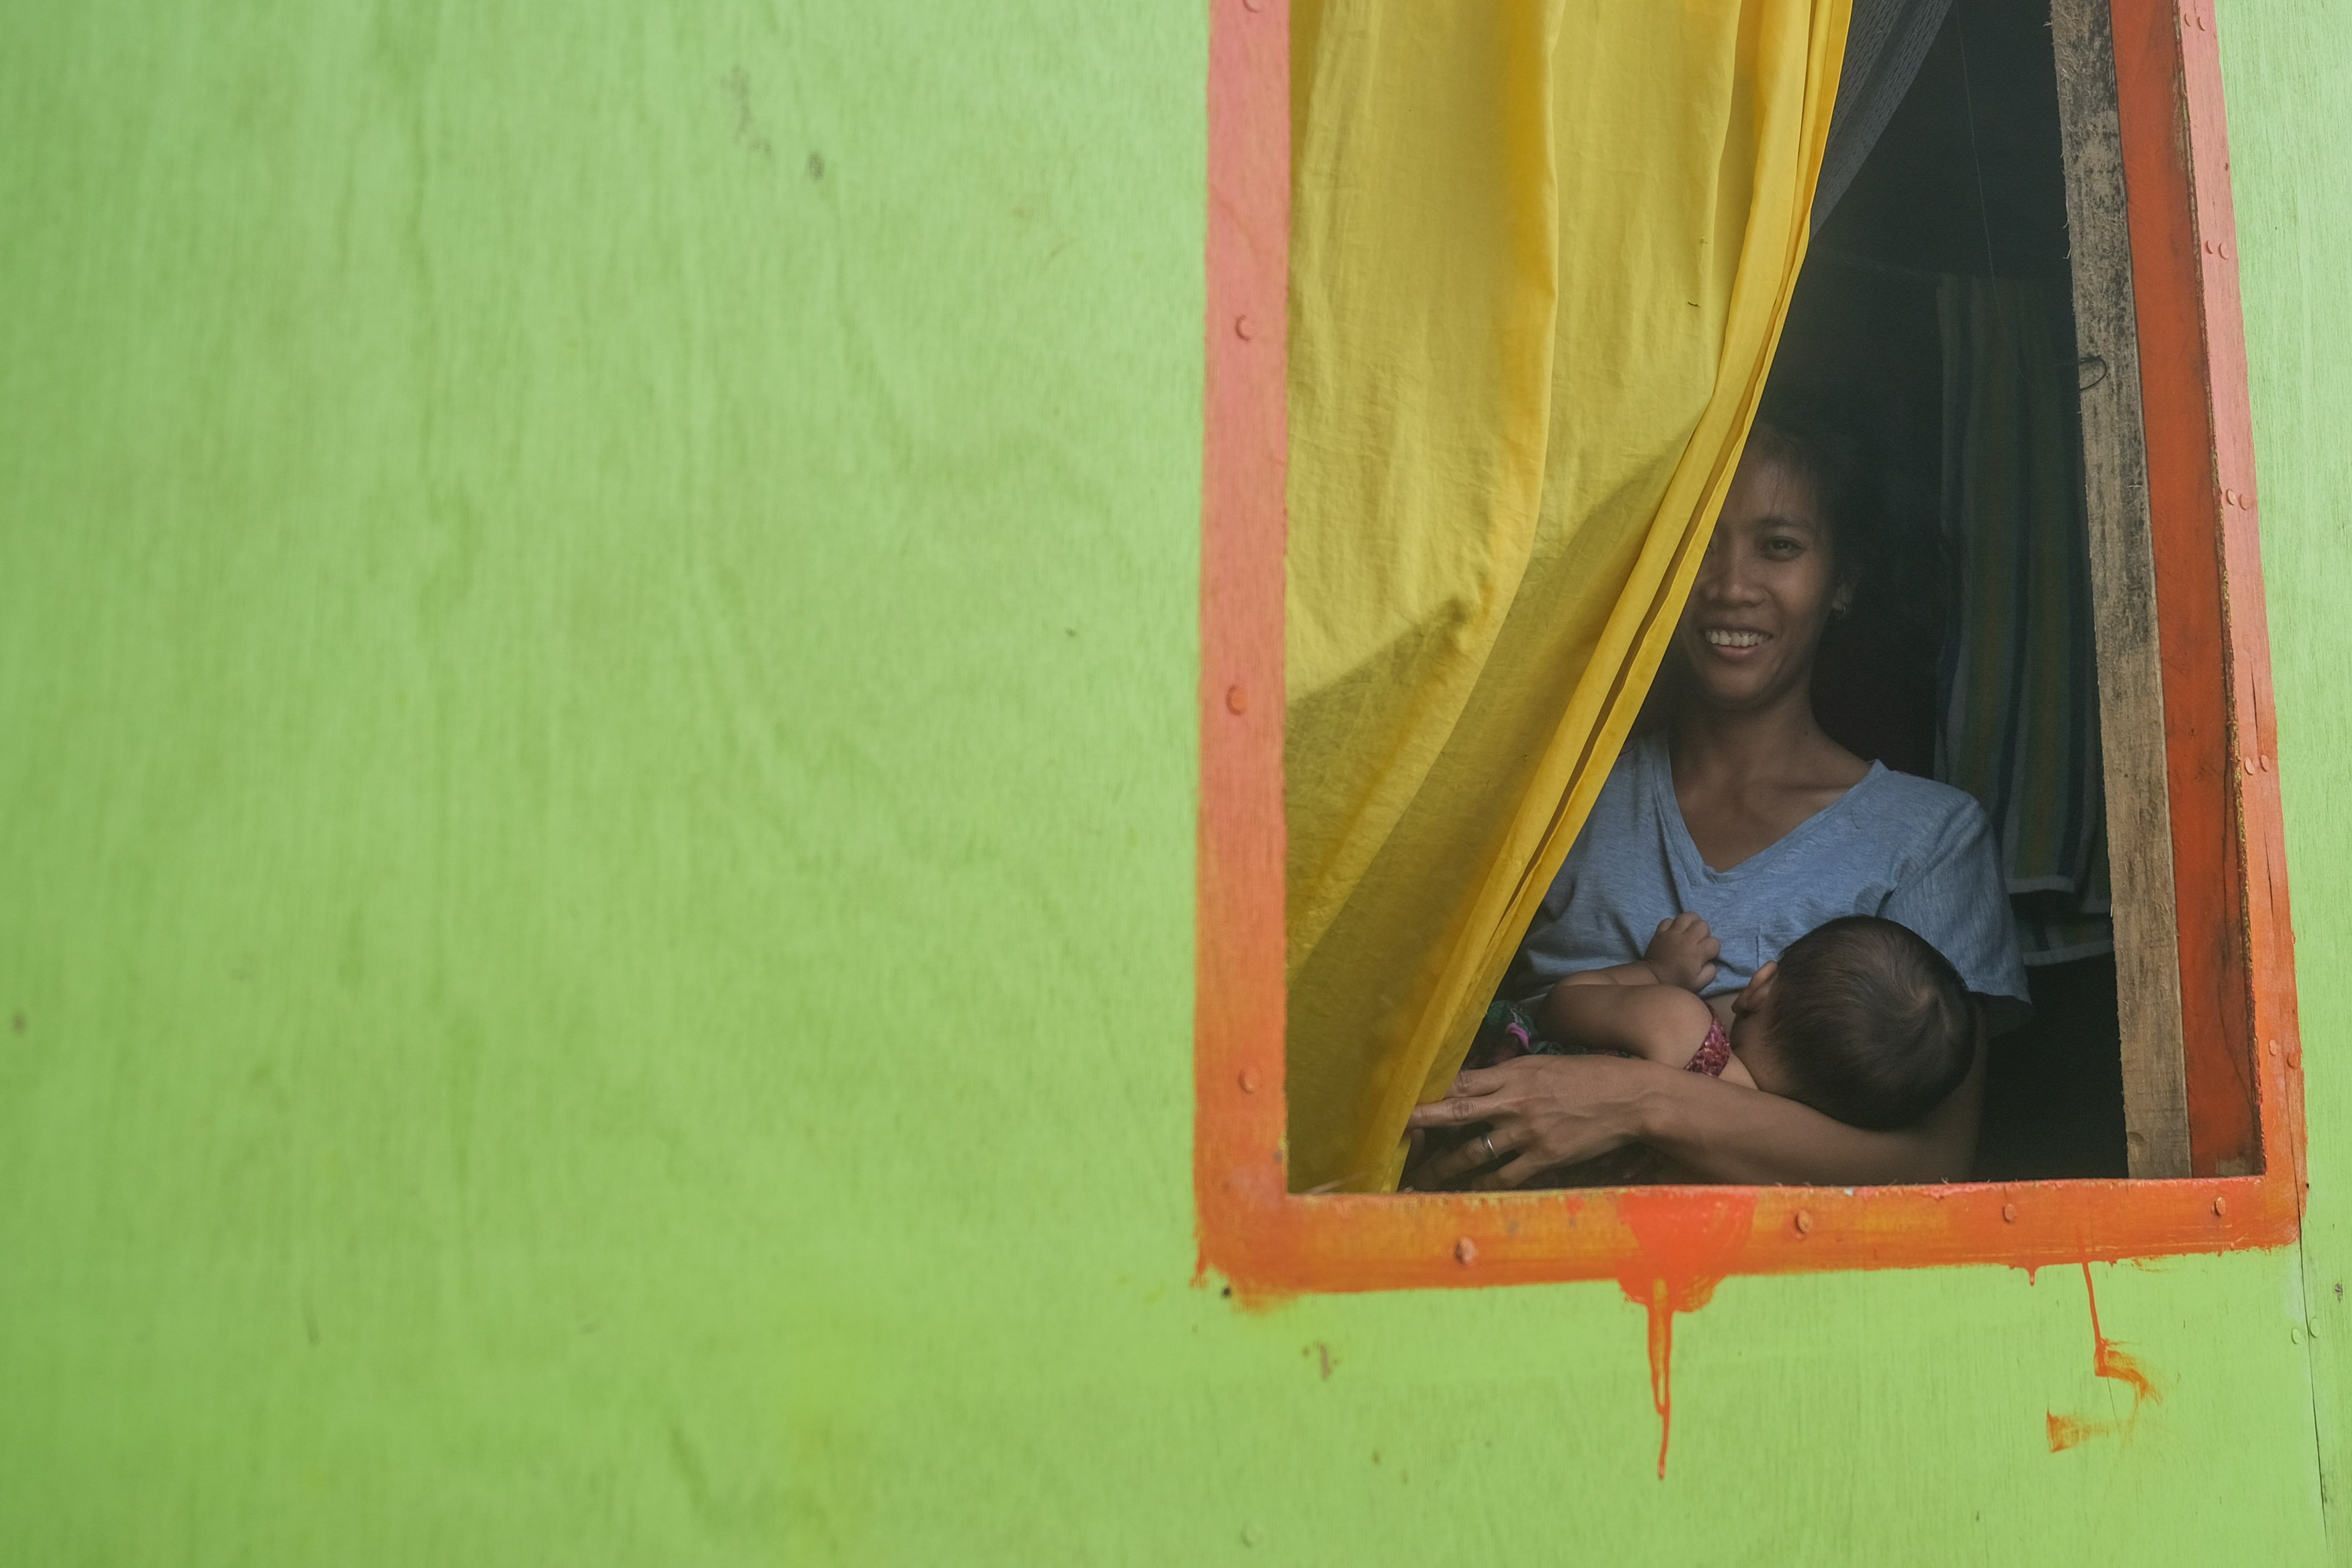 a young mother inside a green house, peering out a window from behind bright yellow curtains. she's holding a baby and breastfeeding as she smiles at the camera